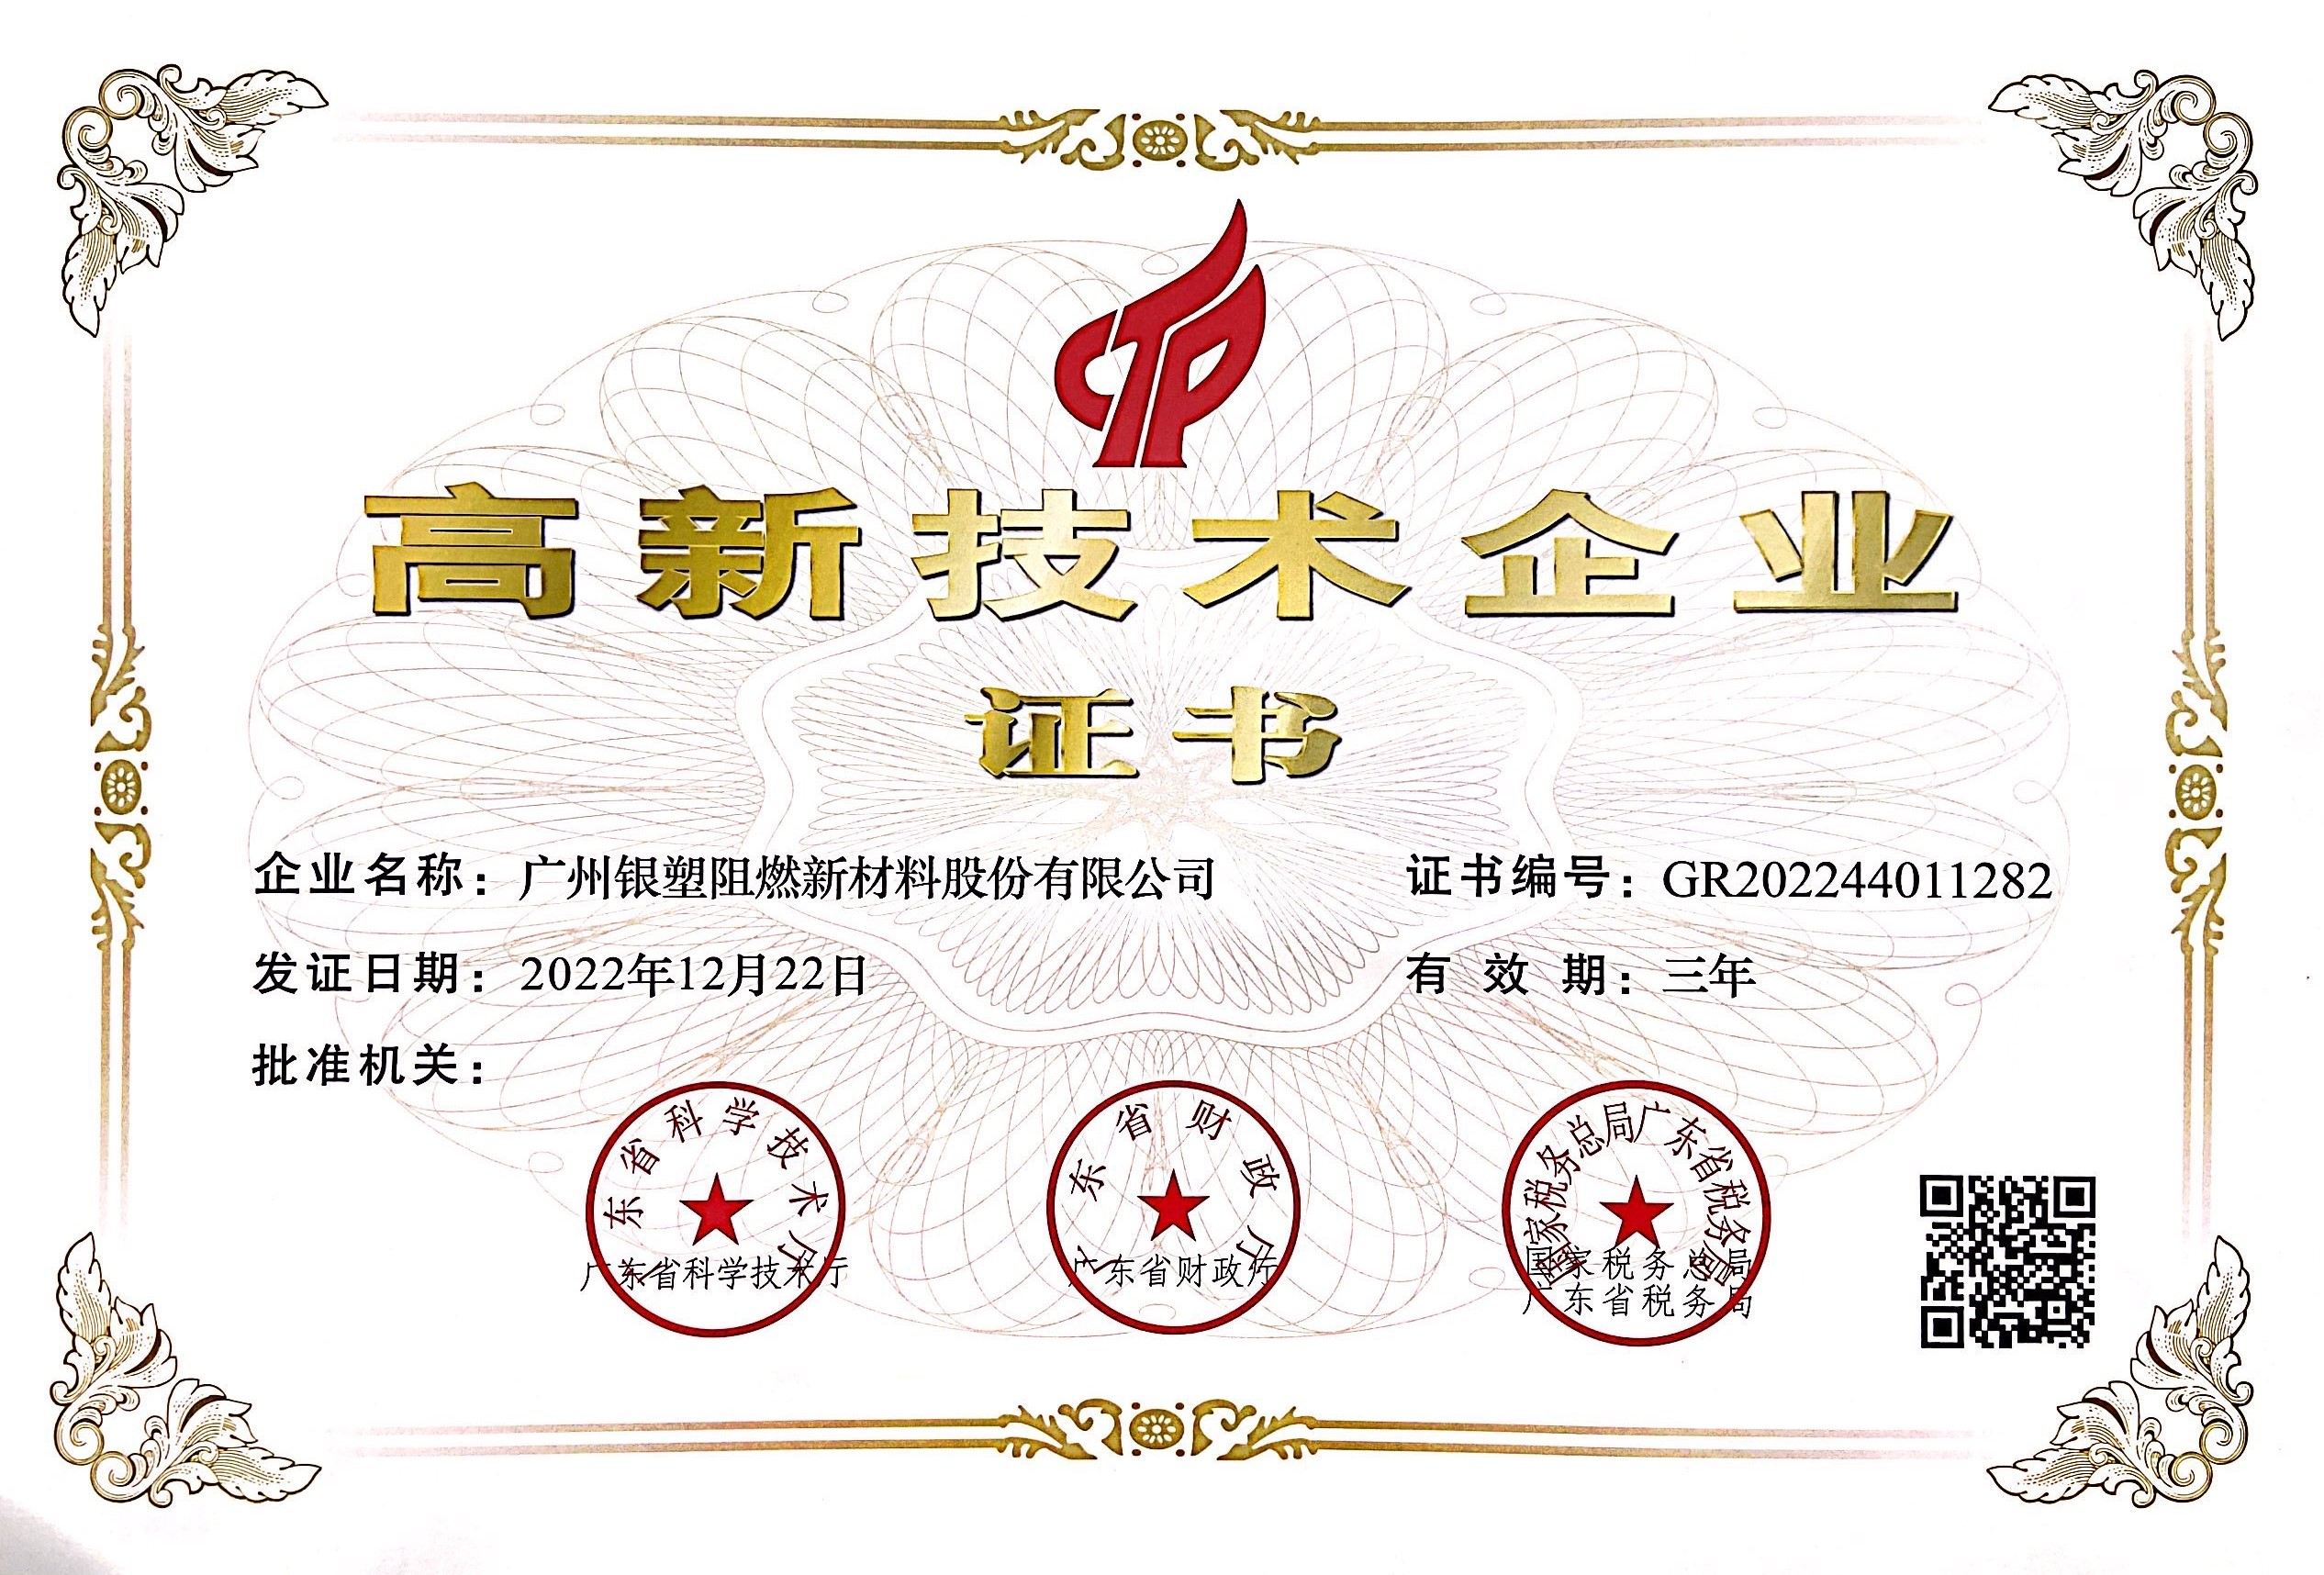 Good News - Yinsu Flame Retardant Was Awarded the Title of "National High-tech Enterprise" Again